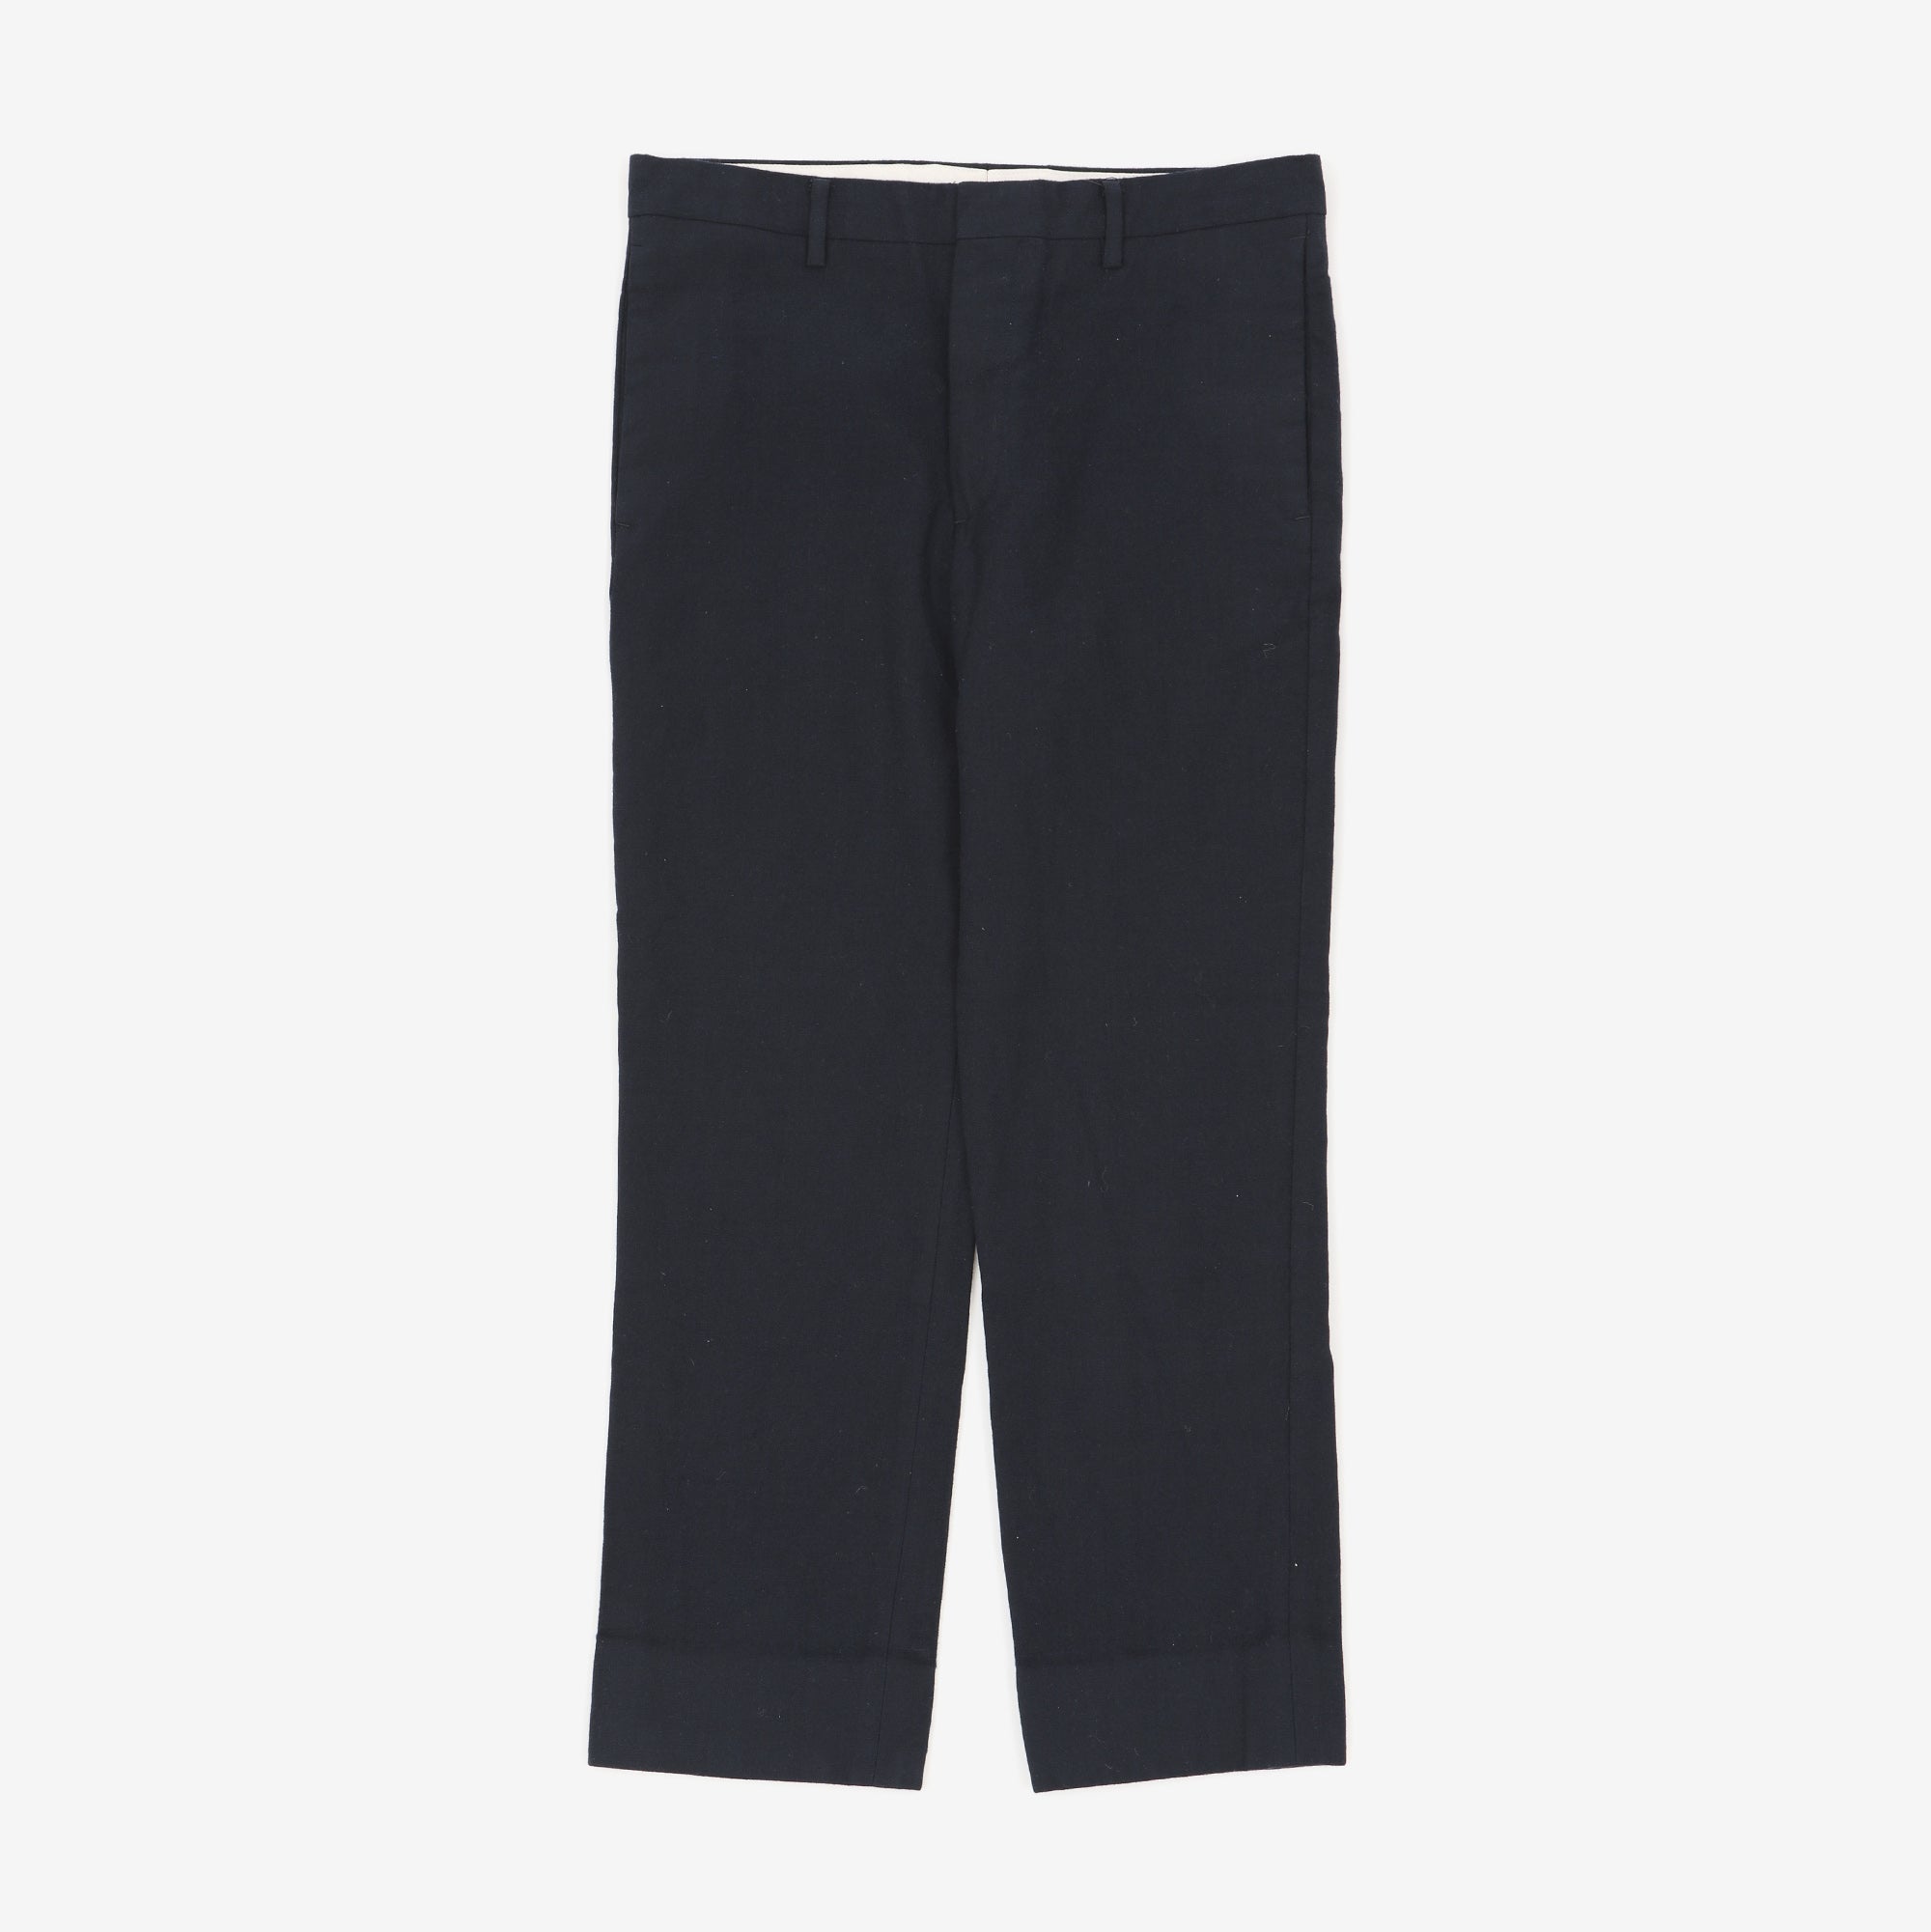 The Guilty Party Wool Chinos